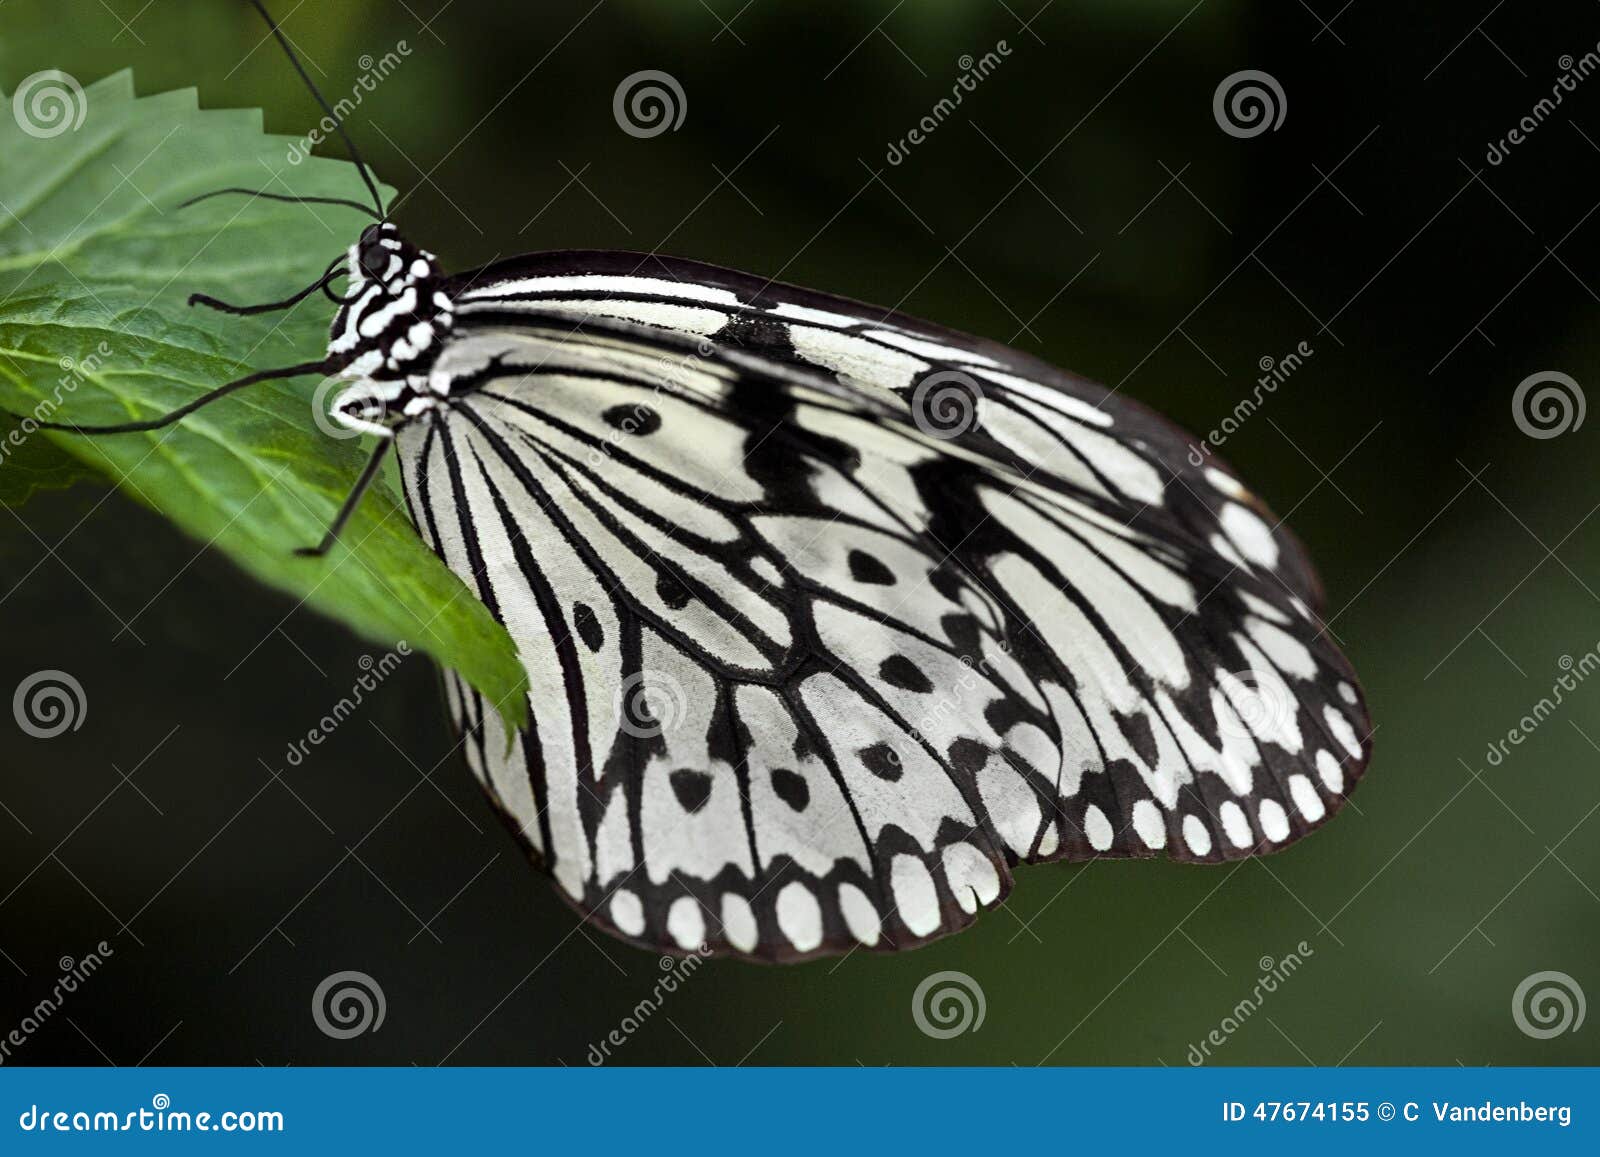 White Butterfly - 1721 stock image. Image of - 47674155